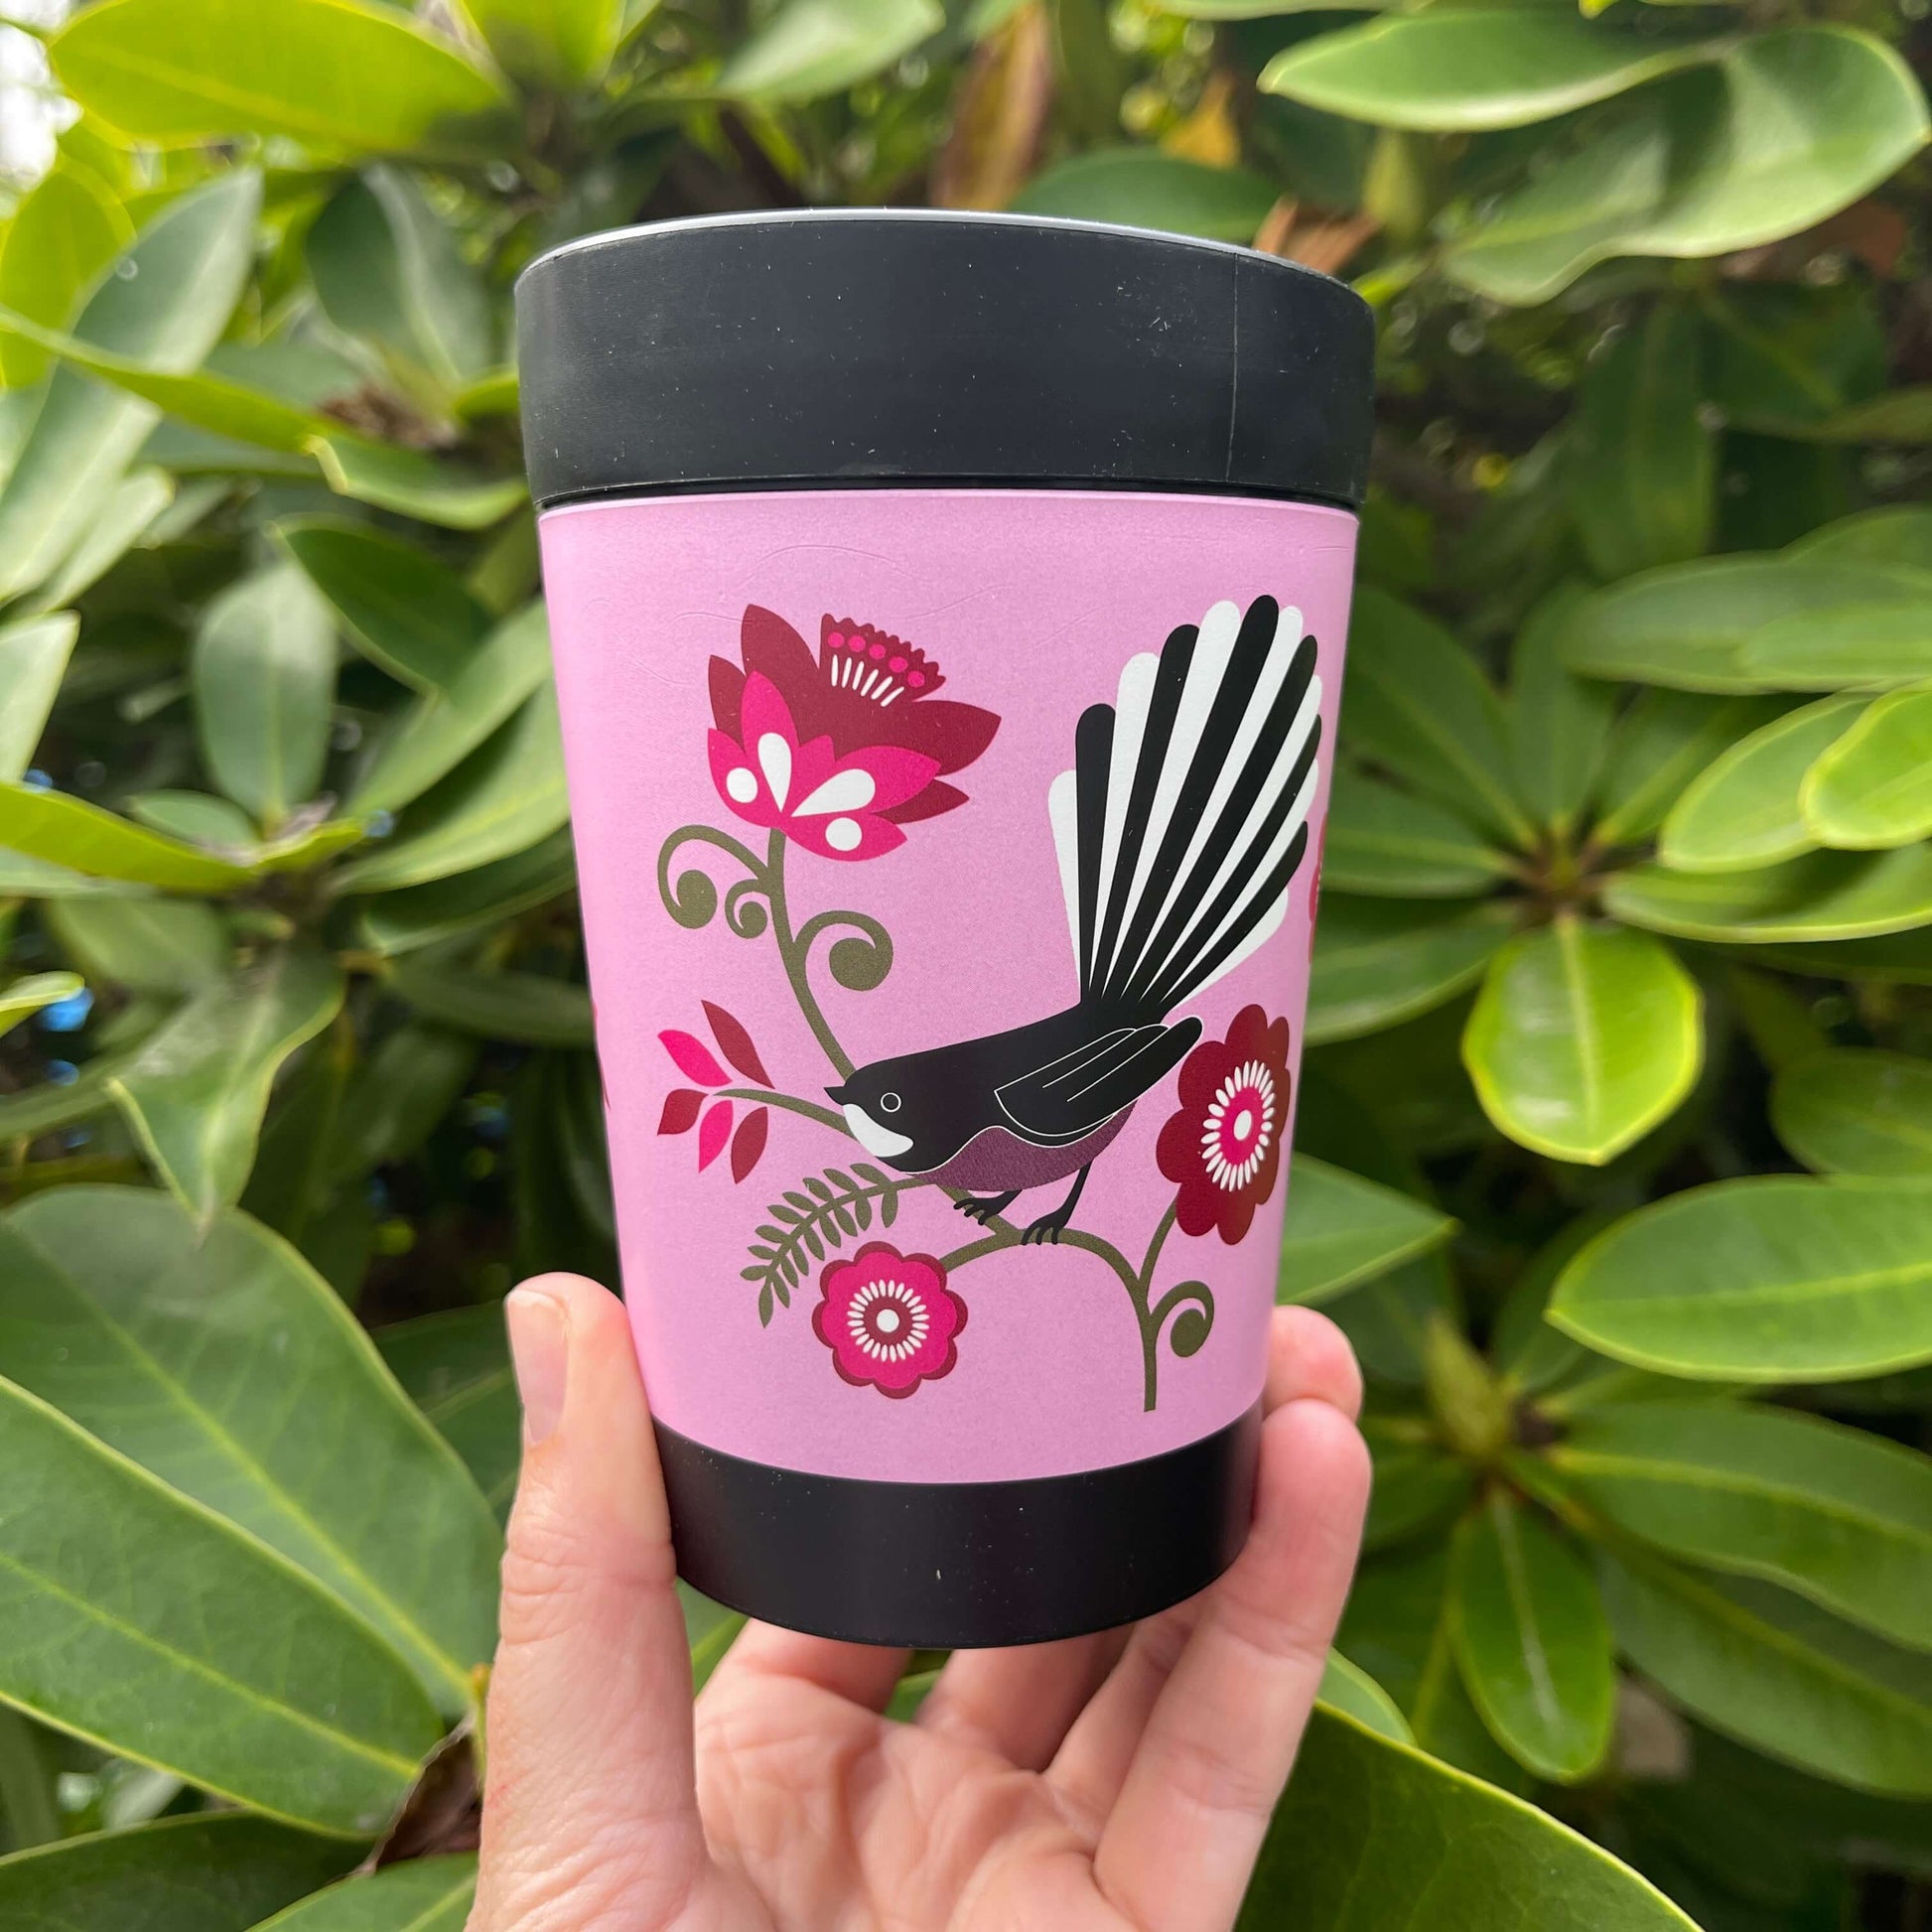 Black reusable coffee cup with bright pink wrap featuring a Fantail bird sitting on a green koru branch with pink flowers.